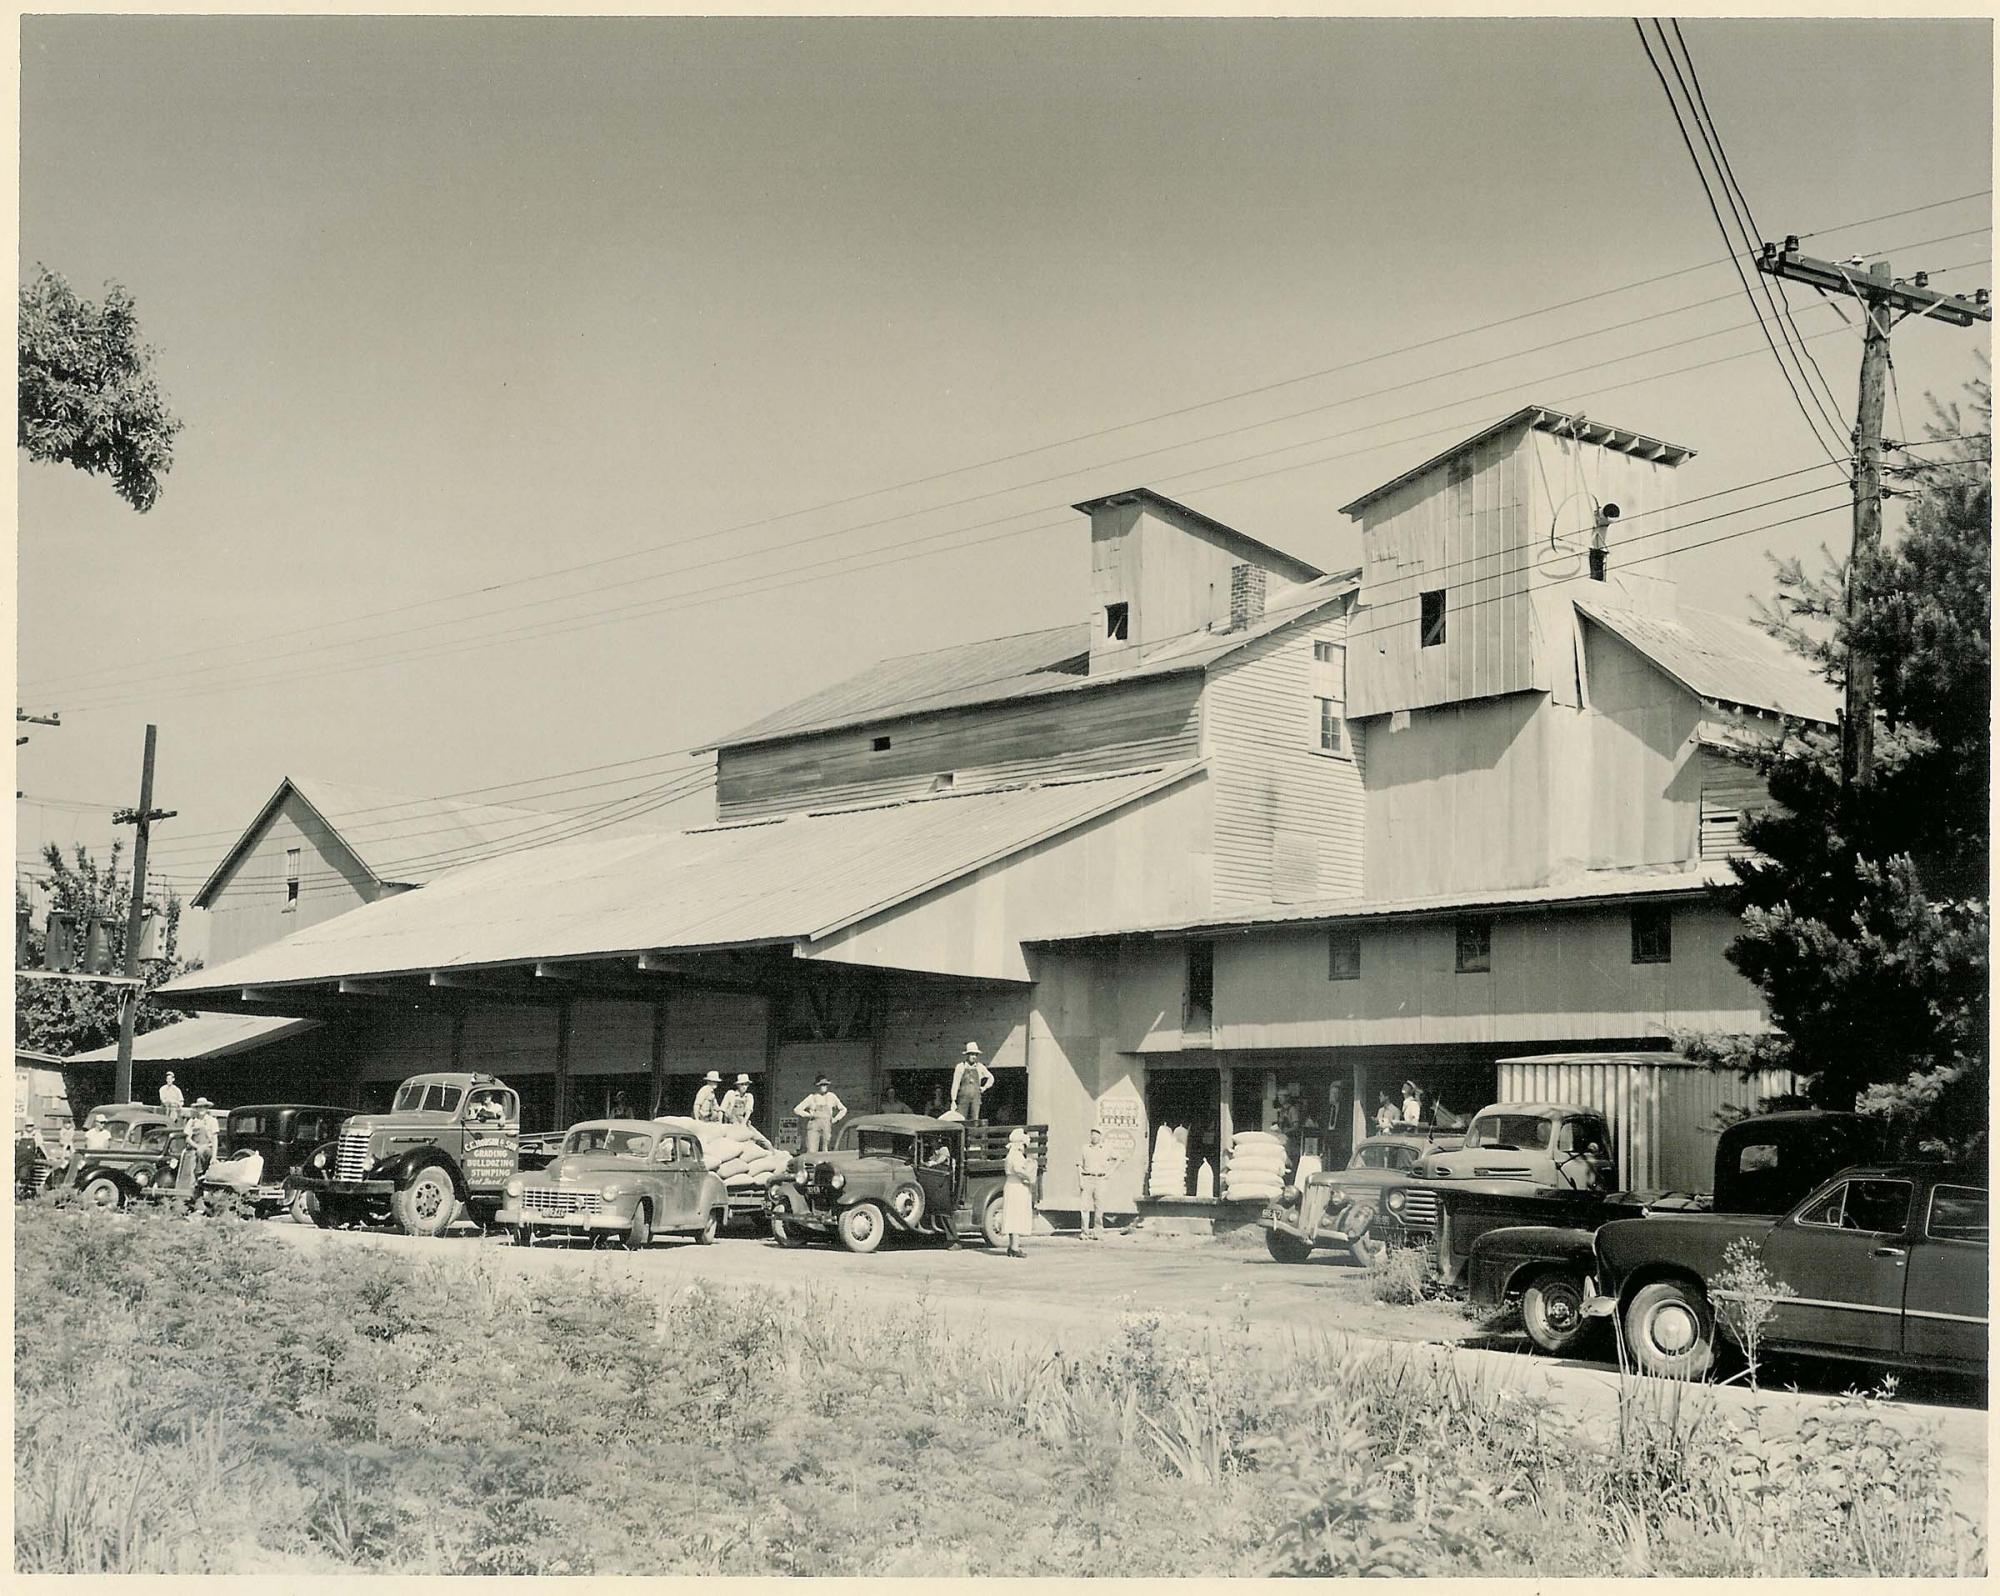 The Lewisville Roller Mill in the 1950s